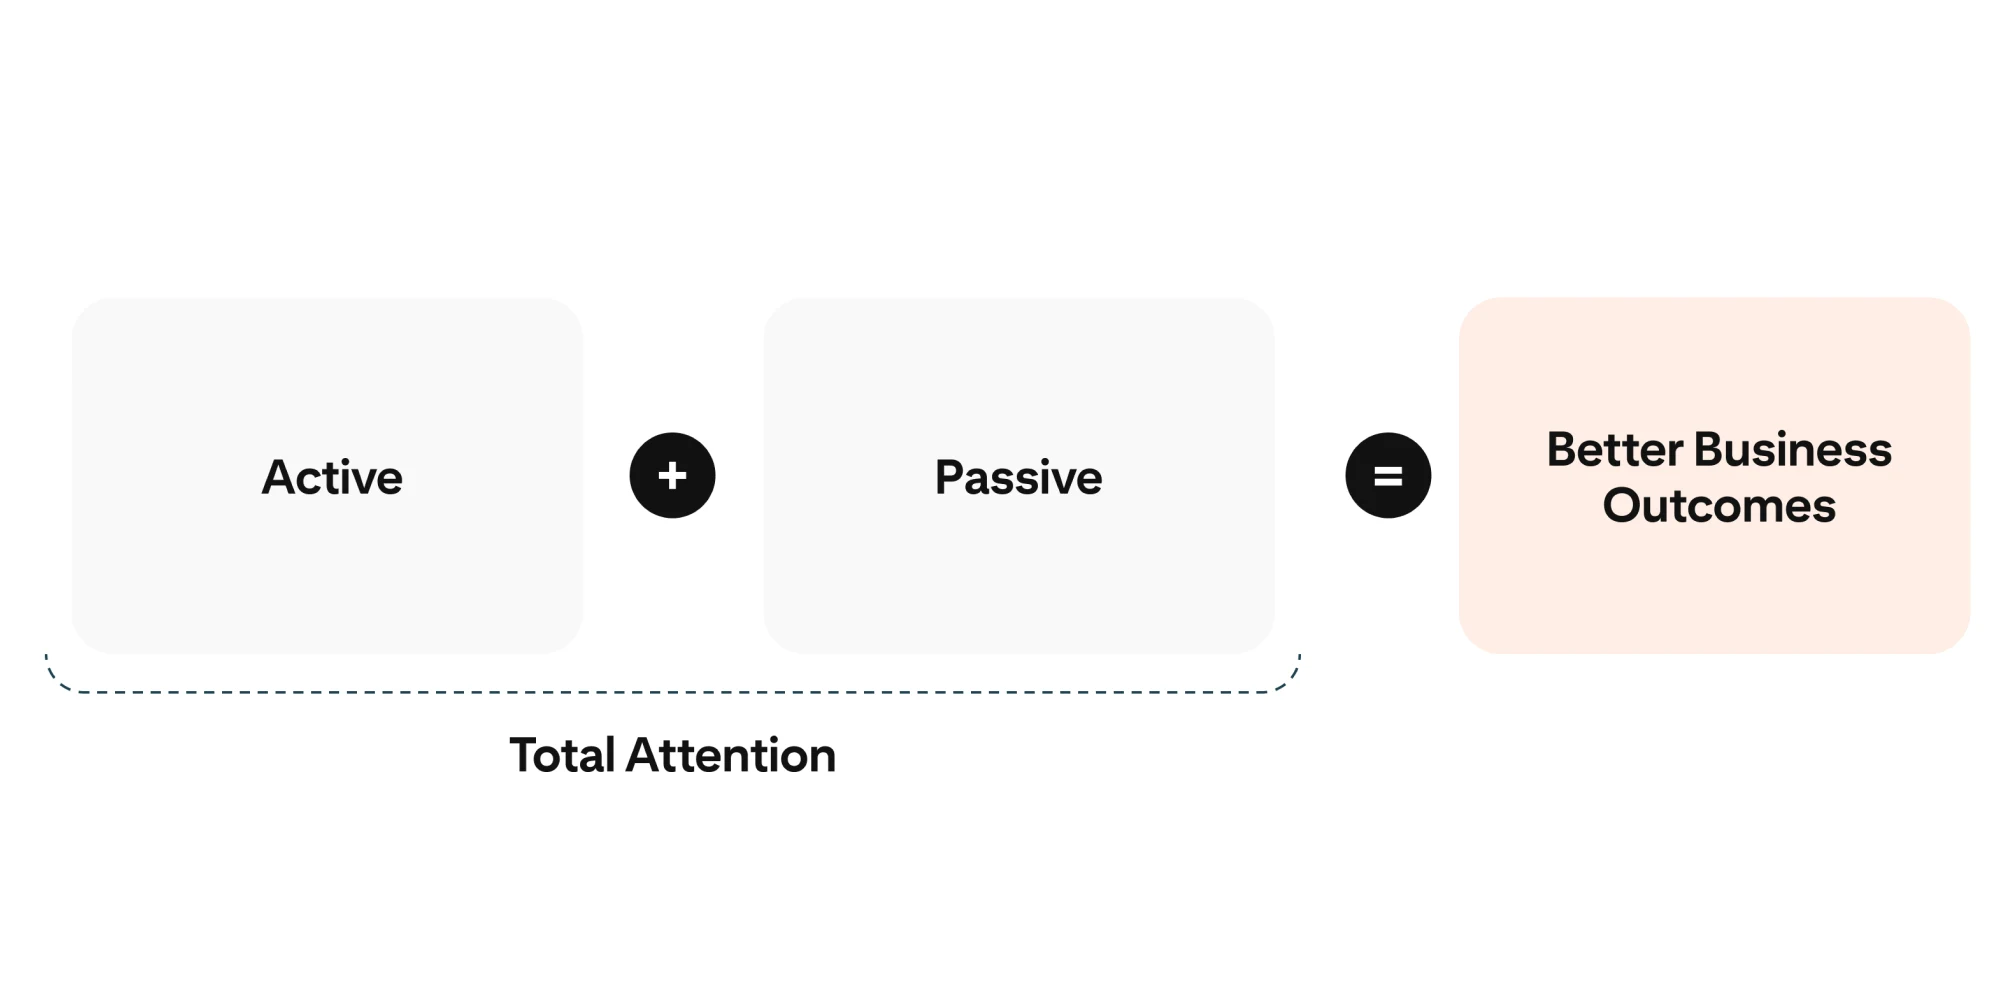 A graphic that explains how Active and Passive Attention become Total Attention, and how that equals better business outcomes.